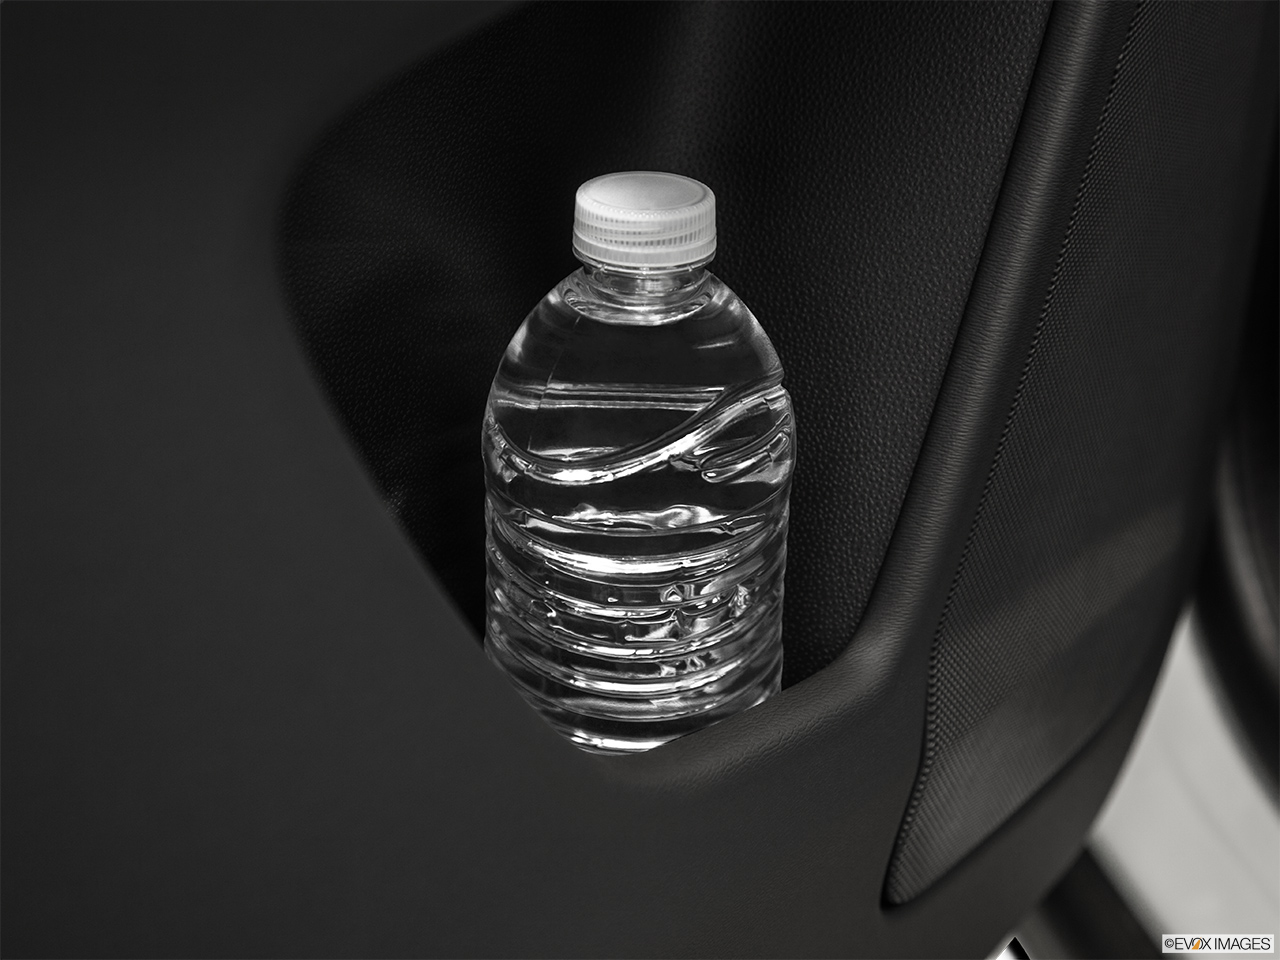 2015 Volvo XC60 Premier Second row side cup holder with coffee prop, or second row door cup holder with water bottle. 